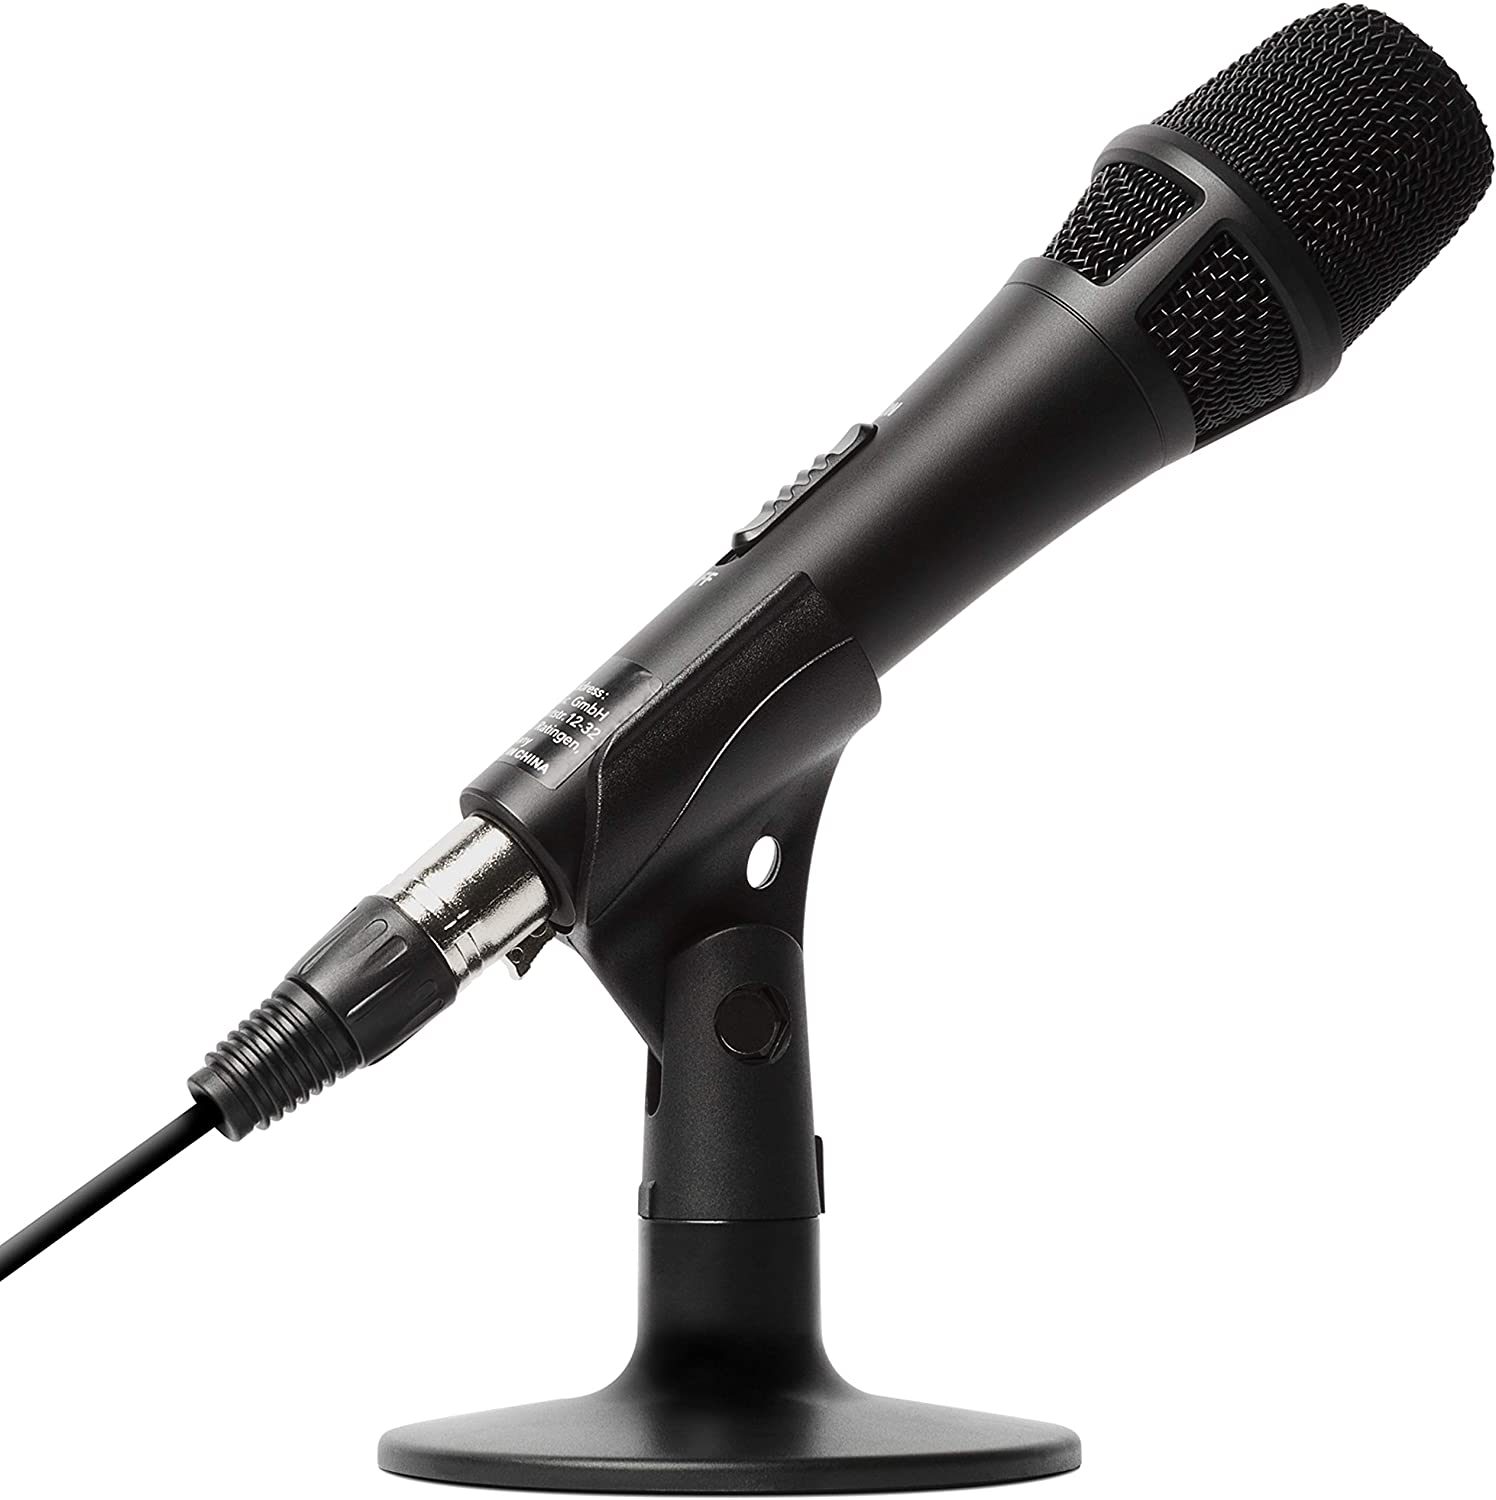 A simple microphone in the Podcast's Christmas Gift Guide 2020